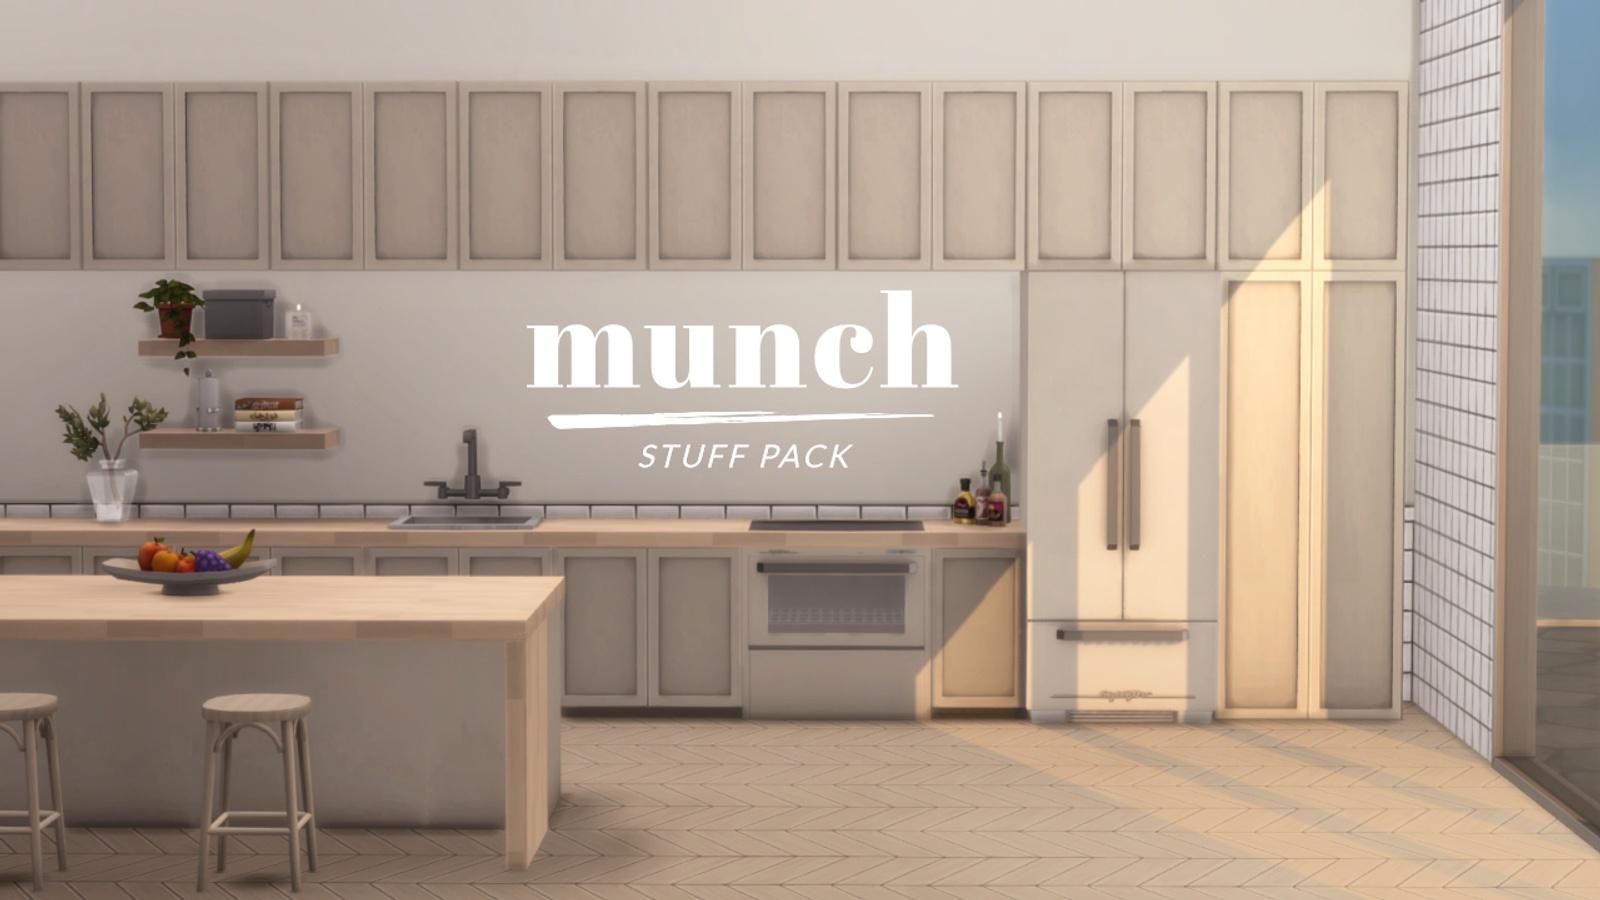 munch stuff pack download charly pancakes